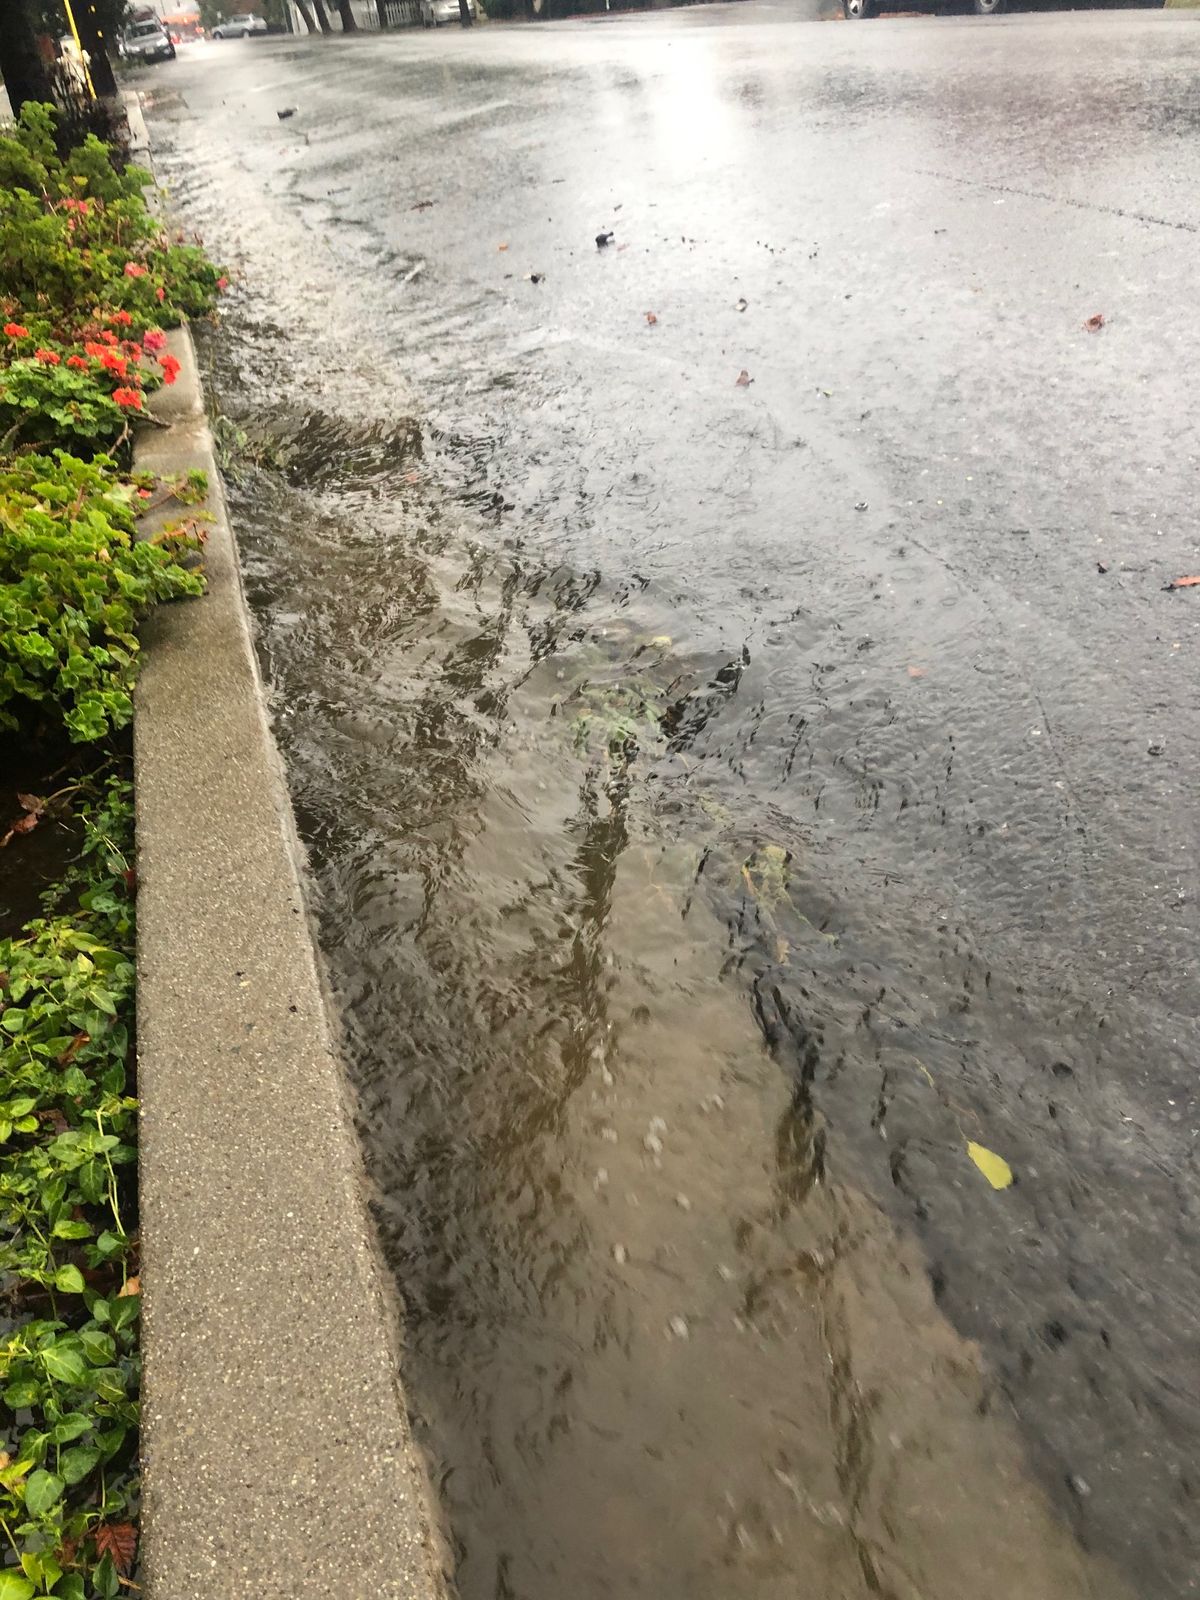 Storm dumps over an inch of rain in Richmond